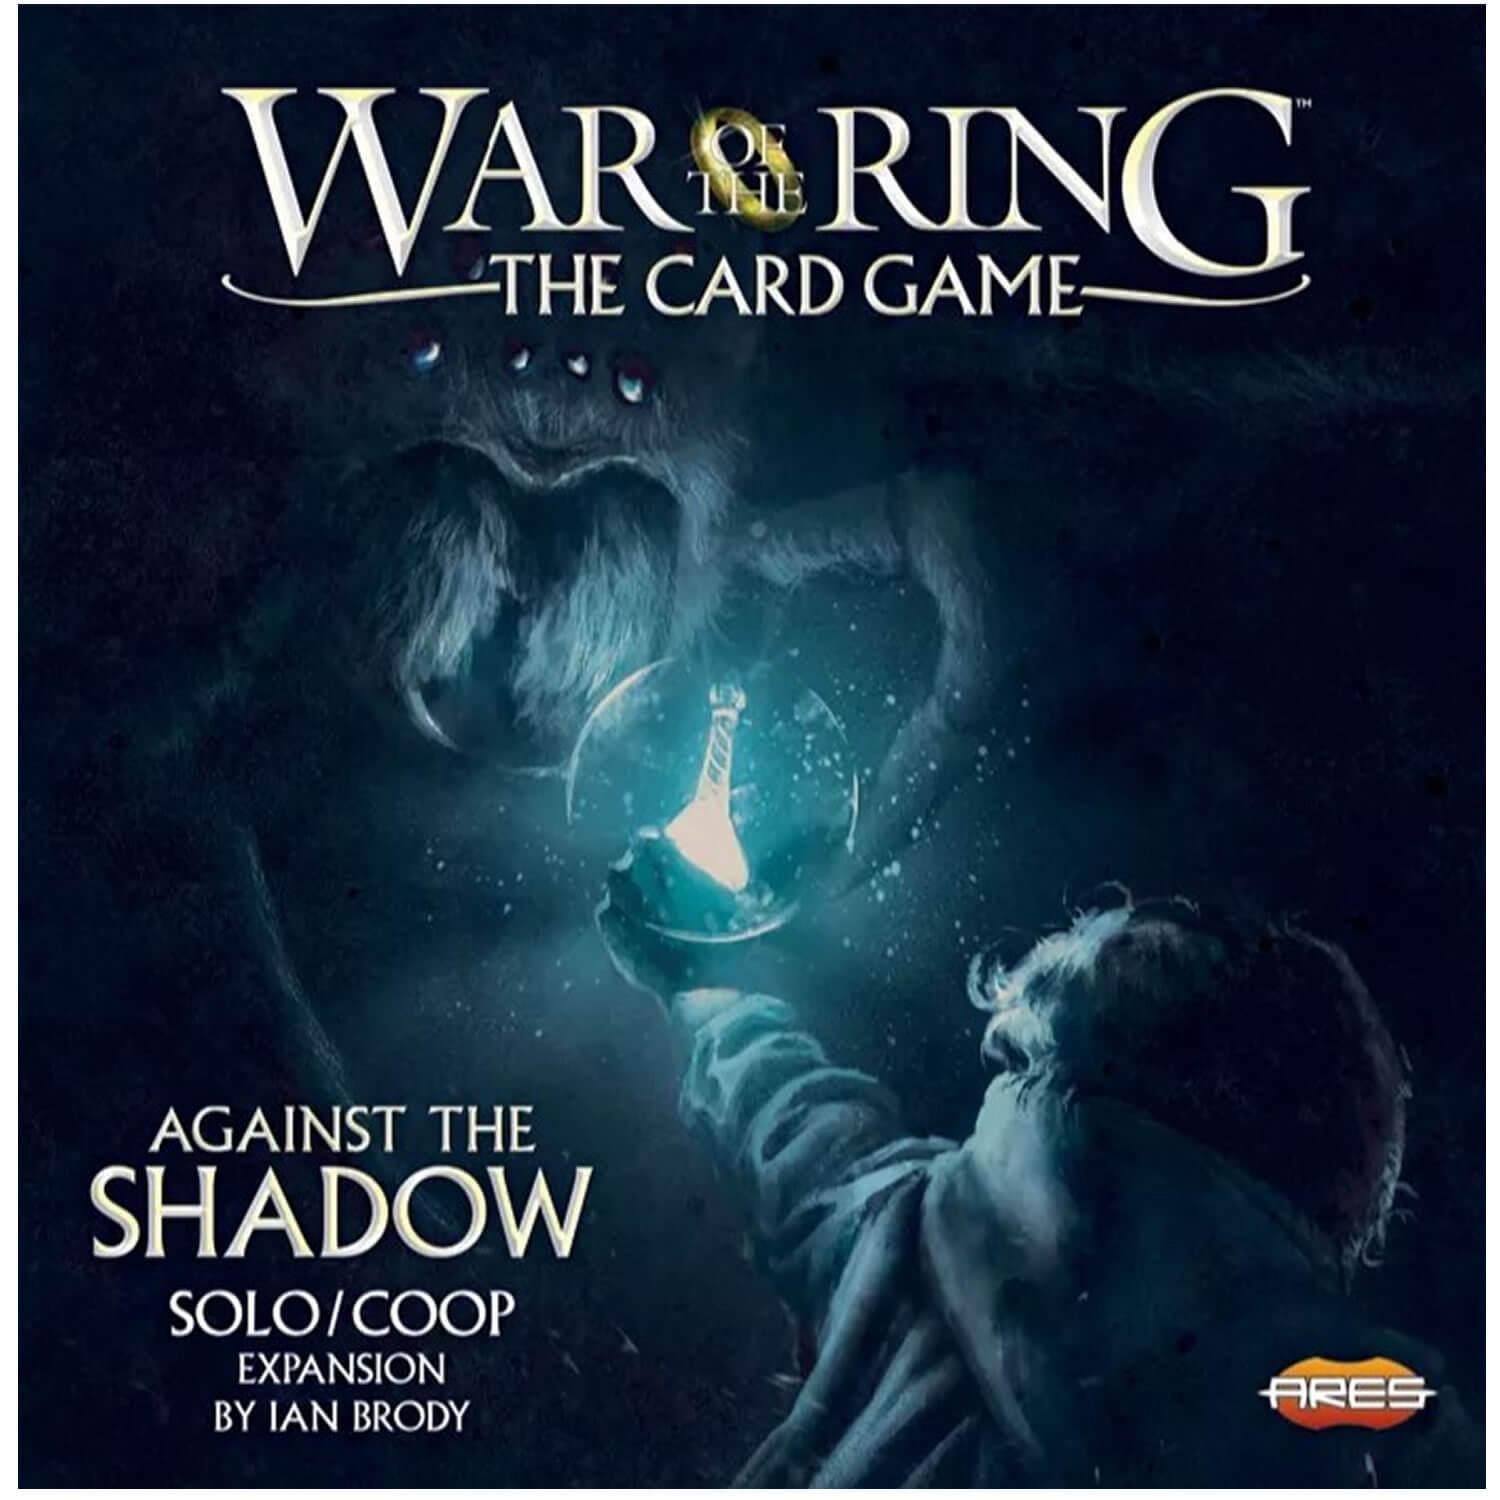 The War of the Ring: The Card Game - Against the Shadow